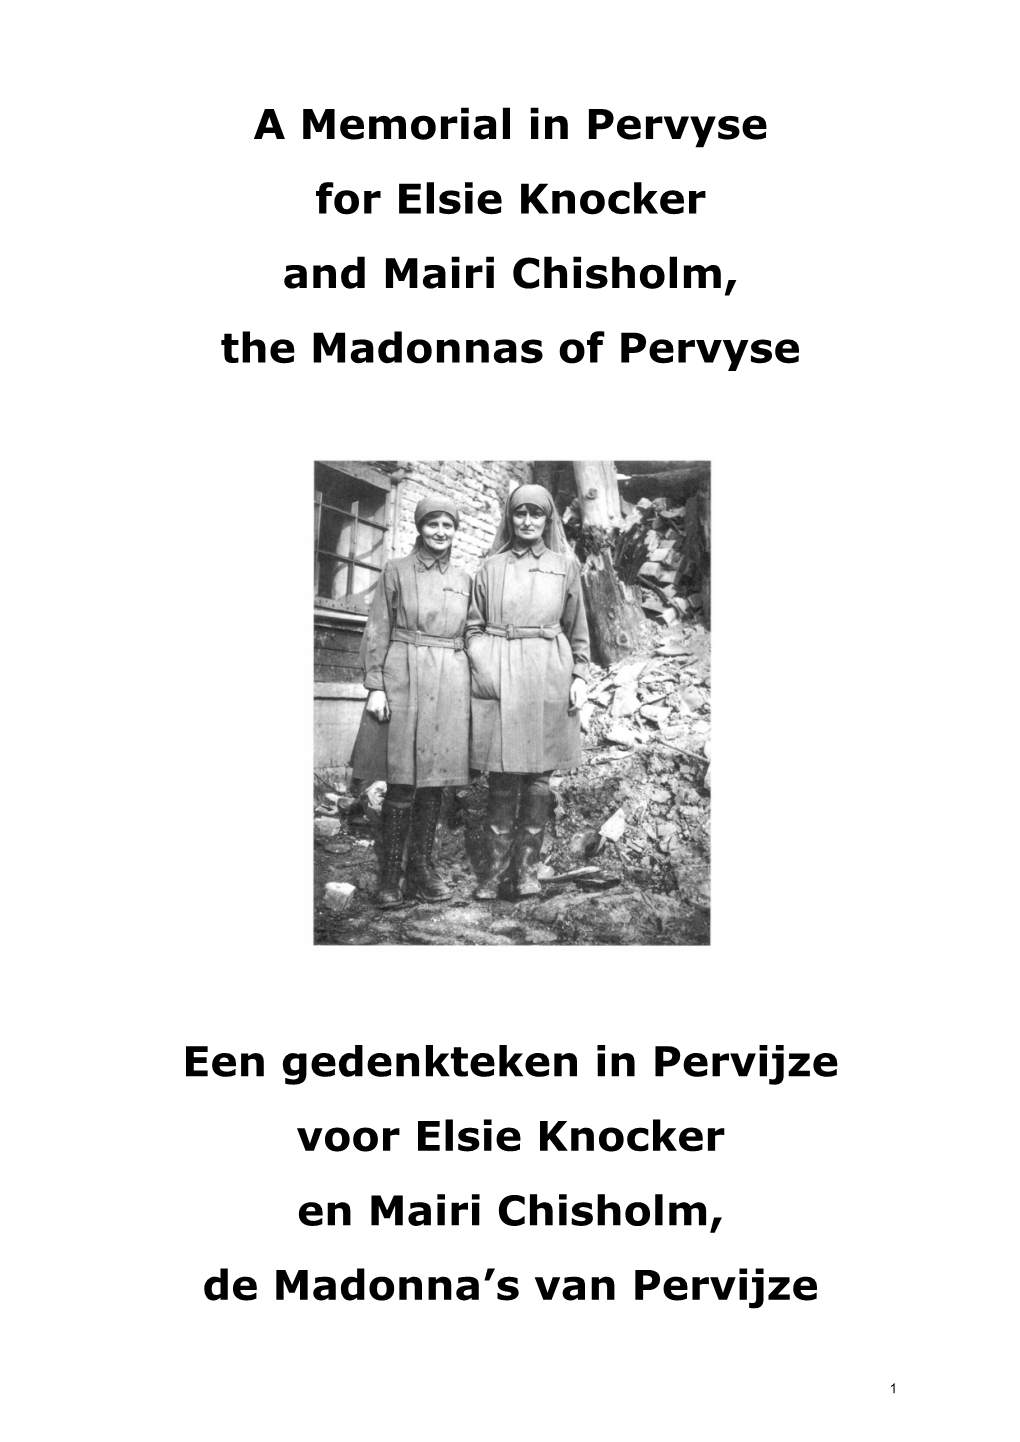 A Memorial in Pervyse for Elsie Knocker and Mairi Chisholm, the Madonnas of Pervyse